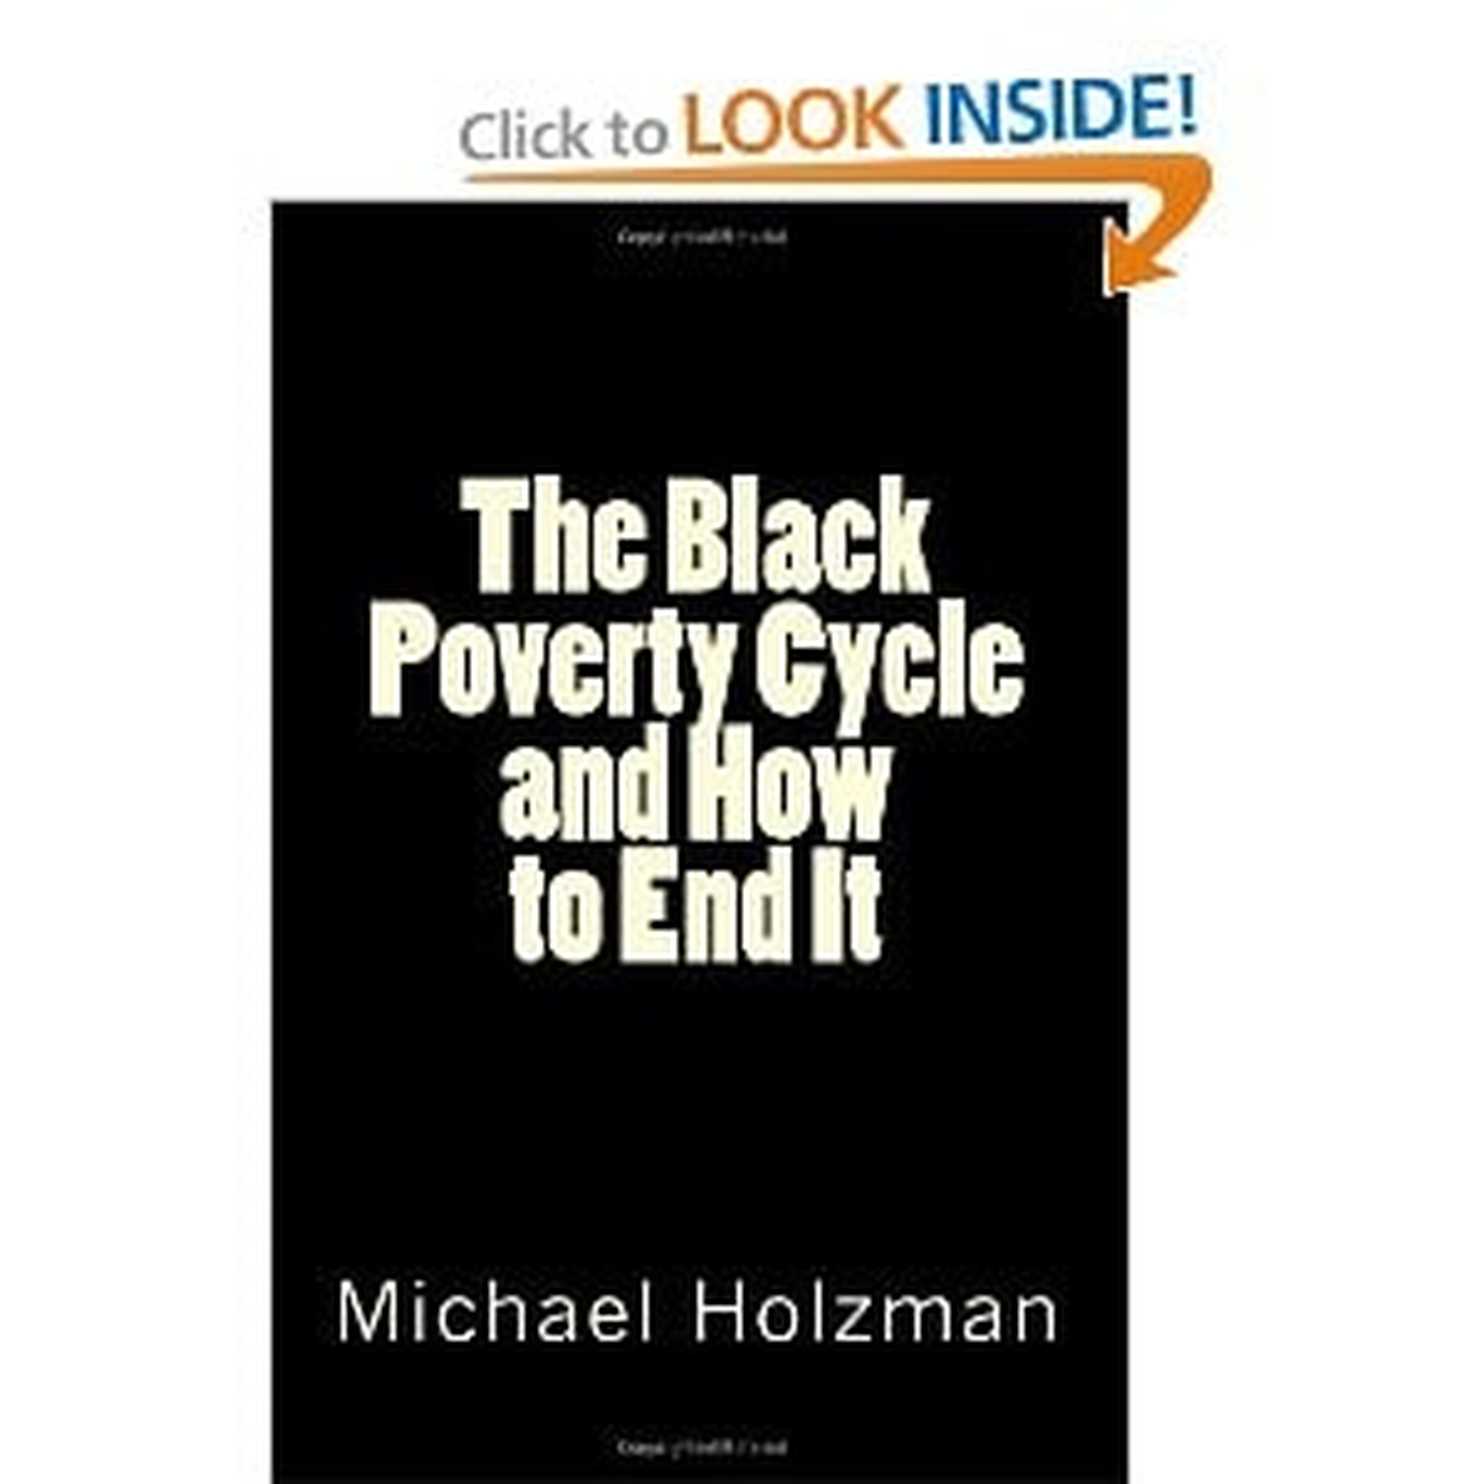 Essay on poverty fosters crime yes or no